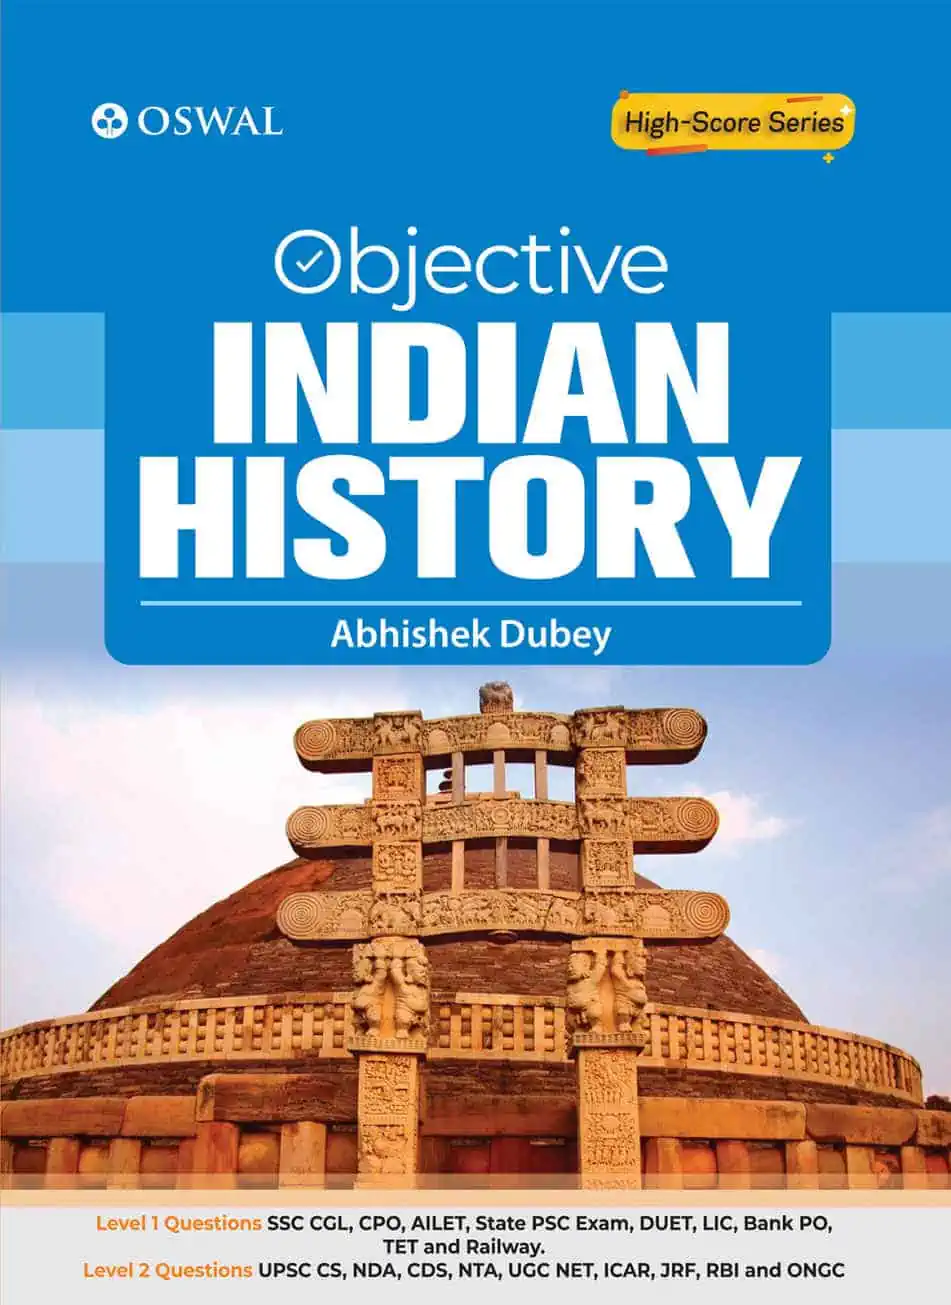 Objective Indian History by Abhisekh Dubey - Oswaal